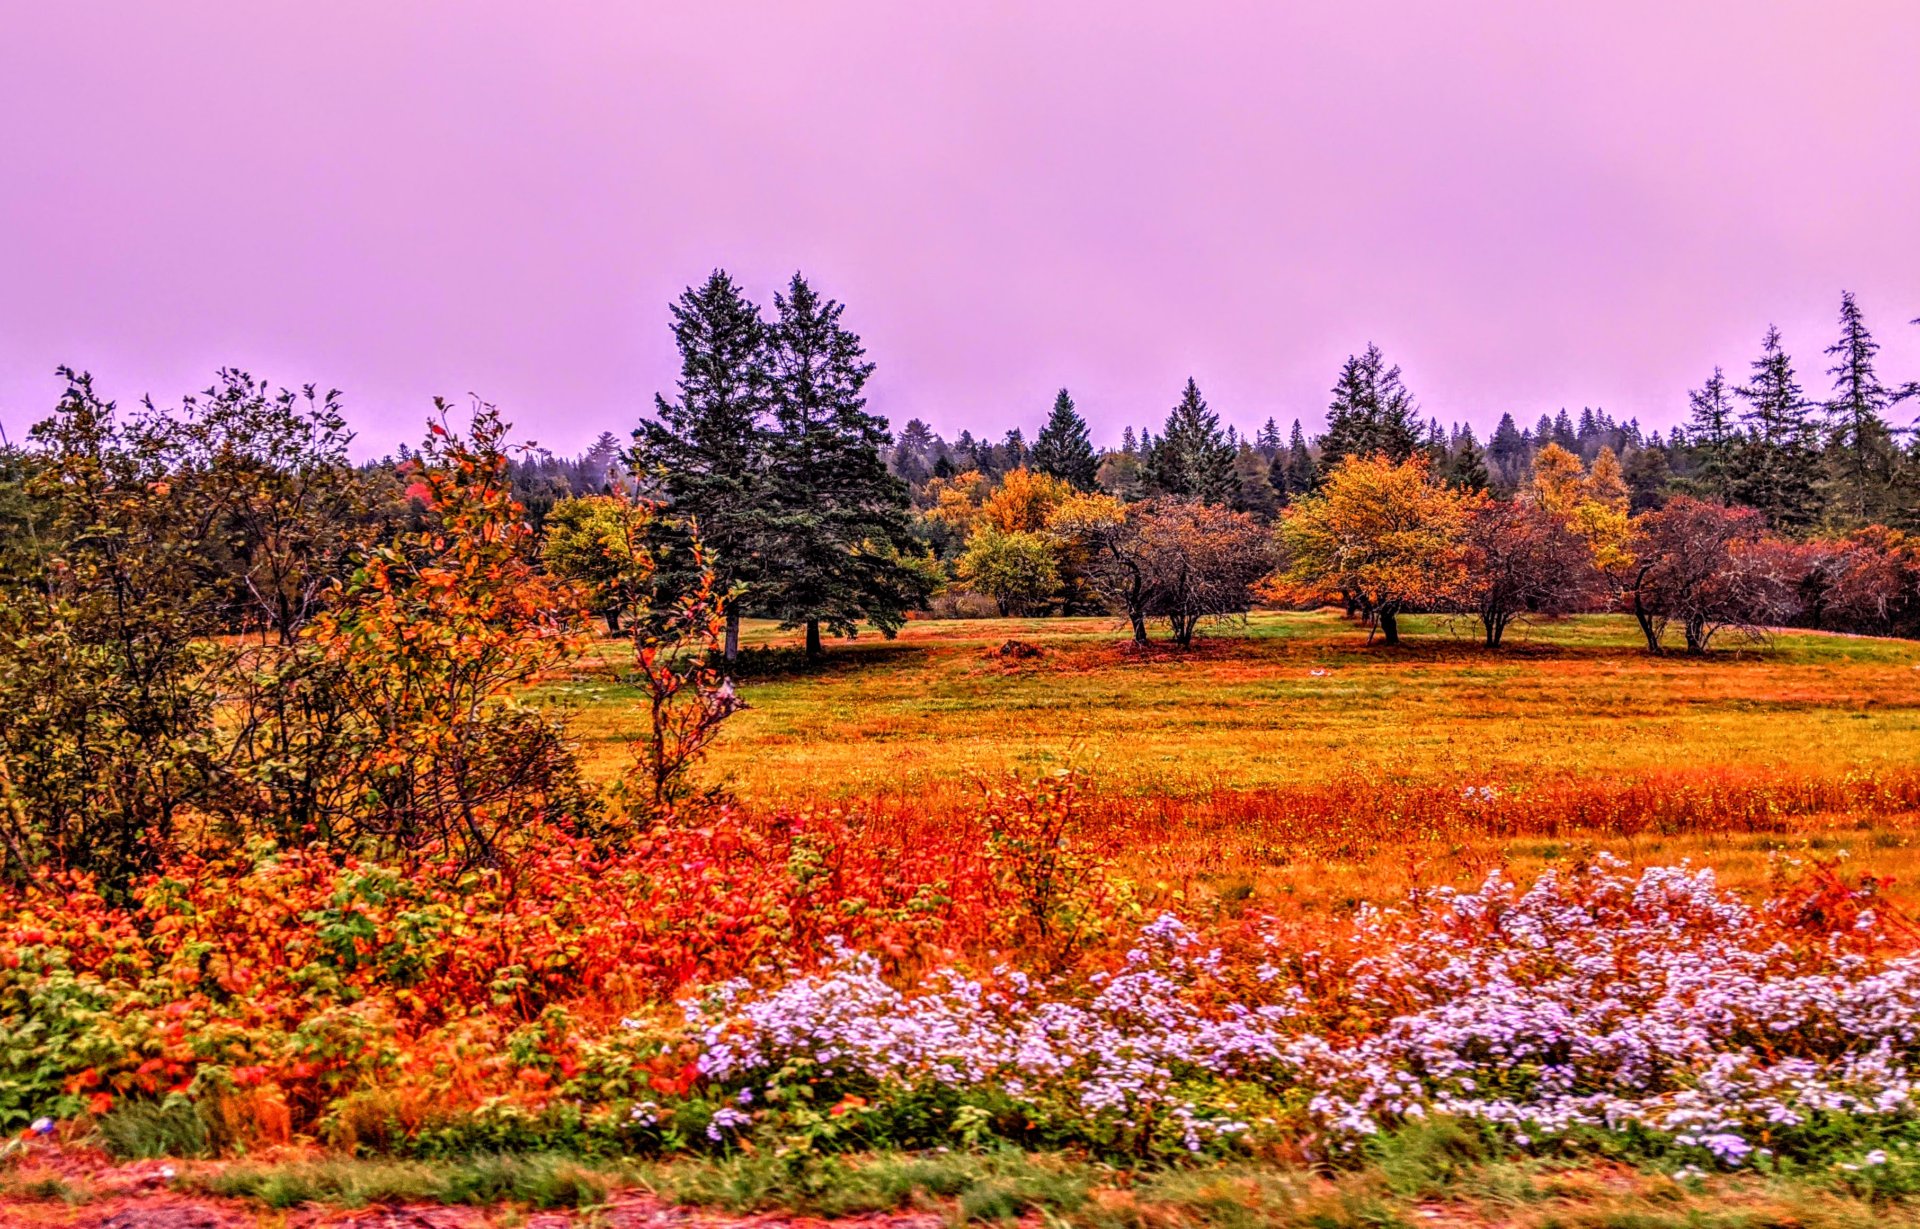 sep, 29 2020 Perry Maine a field with many colors from fall